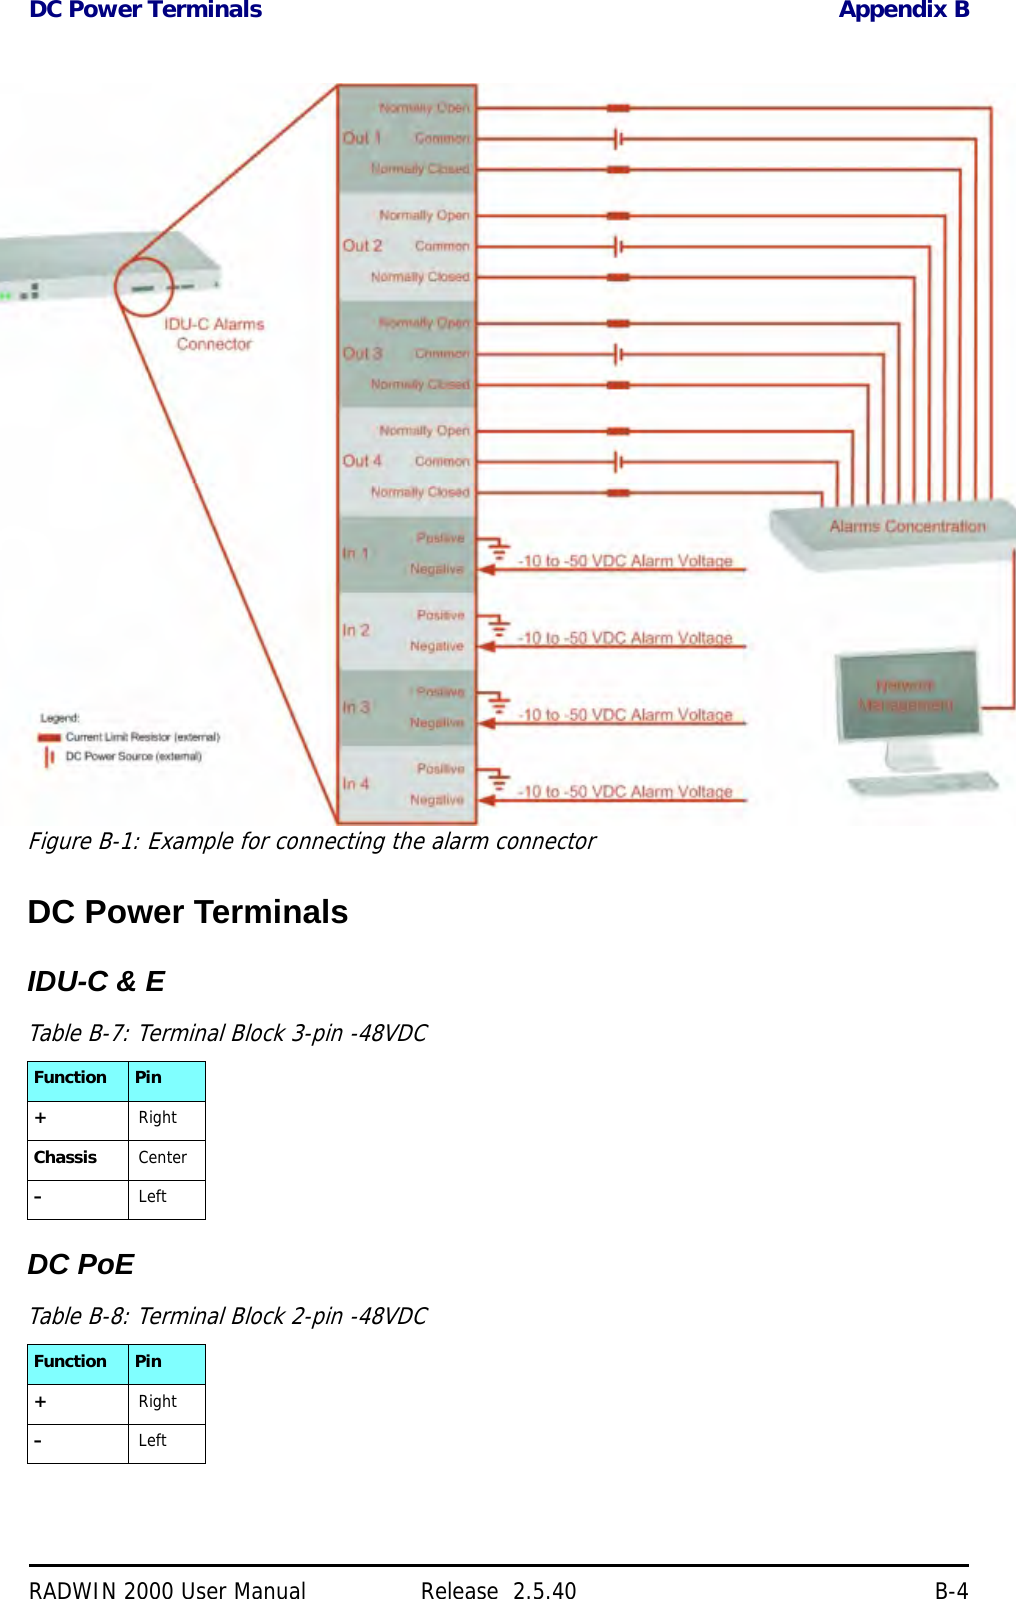 DC Power Terminals Appendix BRADWIN 2000 User Manual Release  2.5.40 B-4Figure B-1: Example for connecting the alarm connectorDC Power TerminalsIDU-C &amp; EDC PoETable B-7: Terminal Block 3-pin -48VDCFunction Pin+RightChassis Center–LeftTable B-8: Terminal Block 2-pin -48VDCFunction Pin+Right–Left